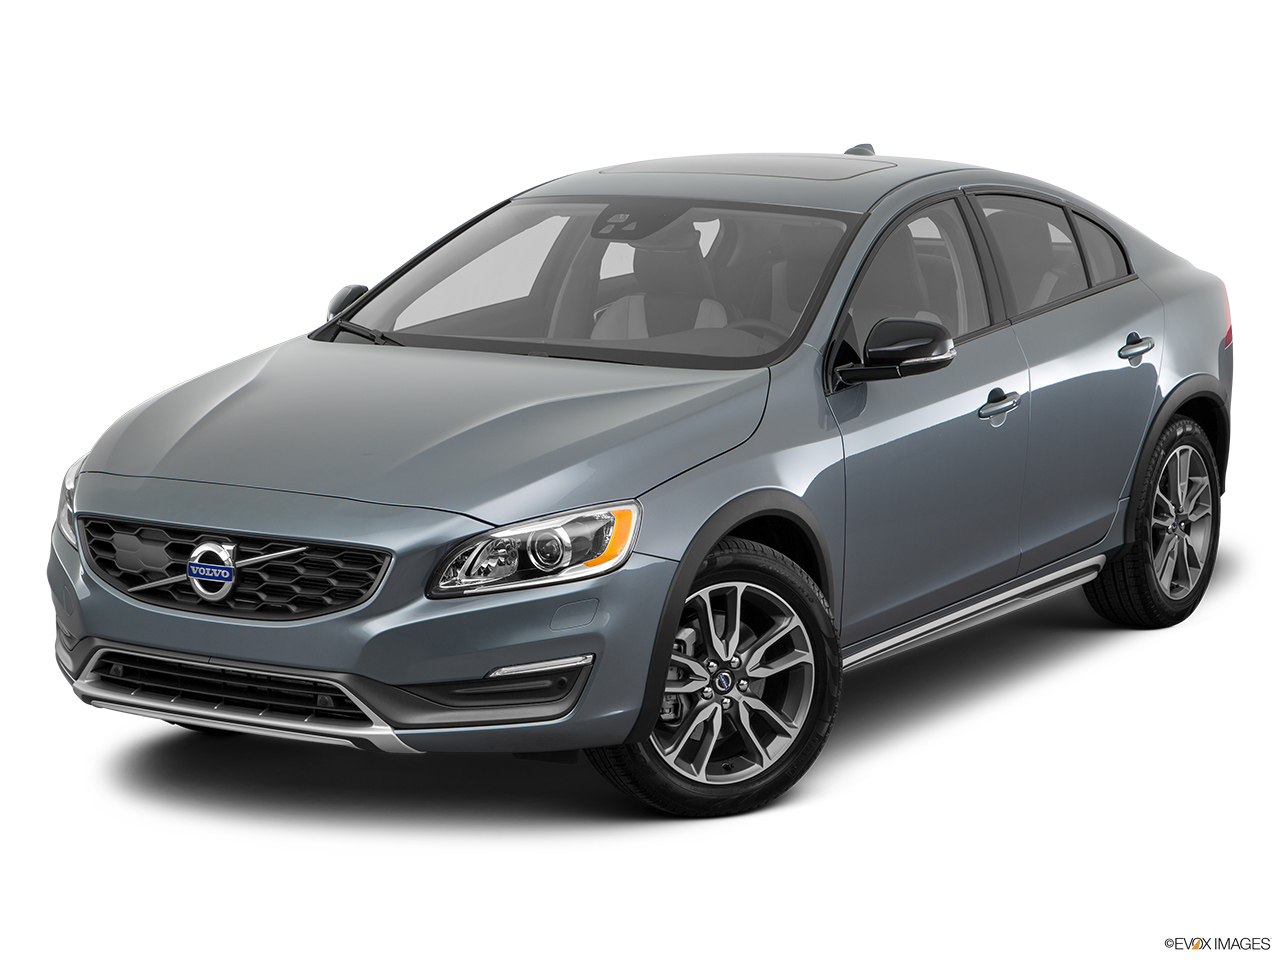 2016 Volvo S60 Cross Country T5 AWD Front angle view. 